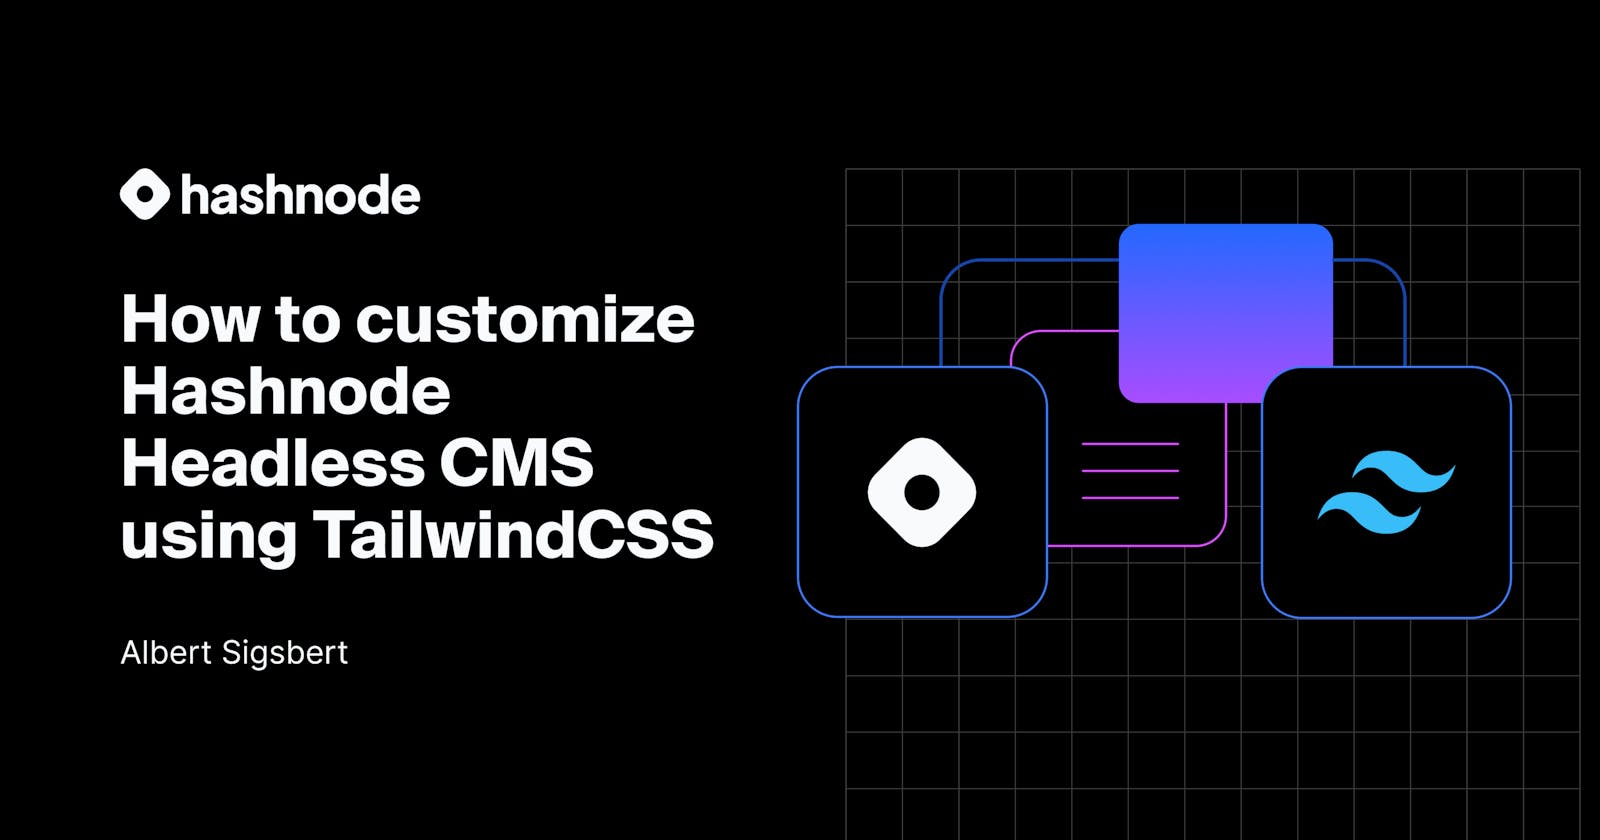 Cover Image for How to customize Hashnode Headless CMS using TailwindCSS